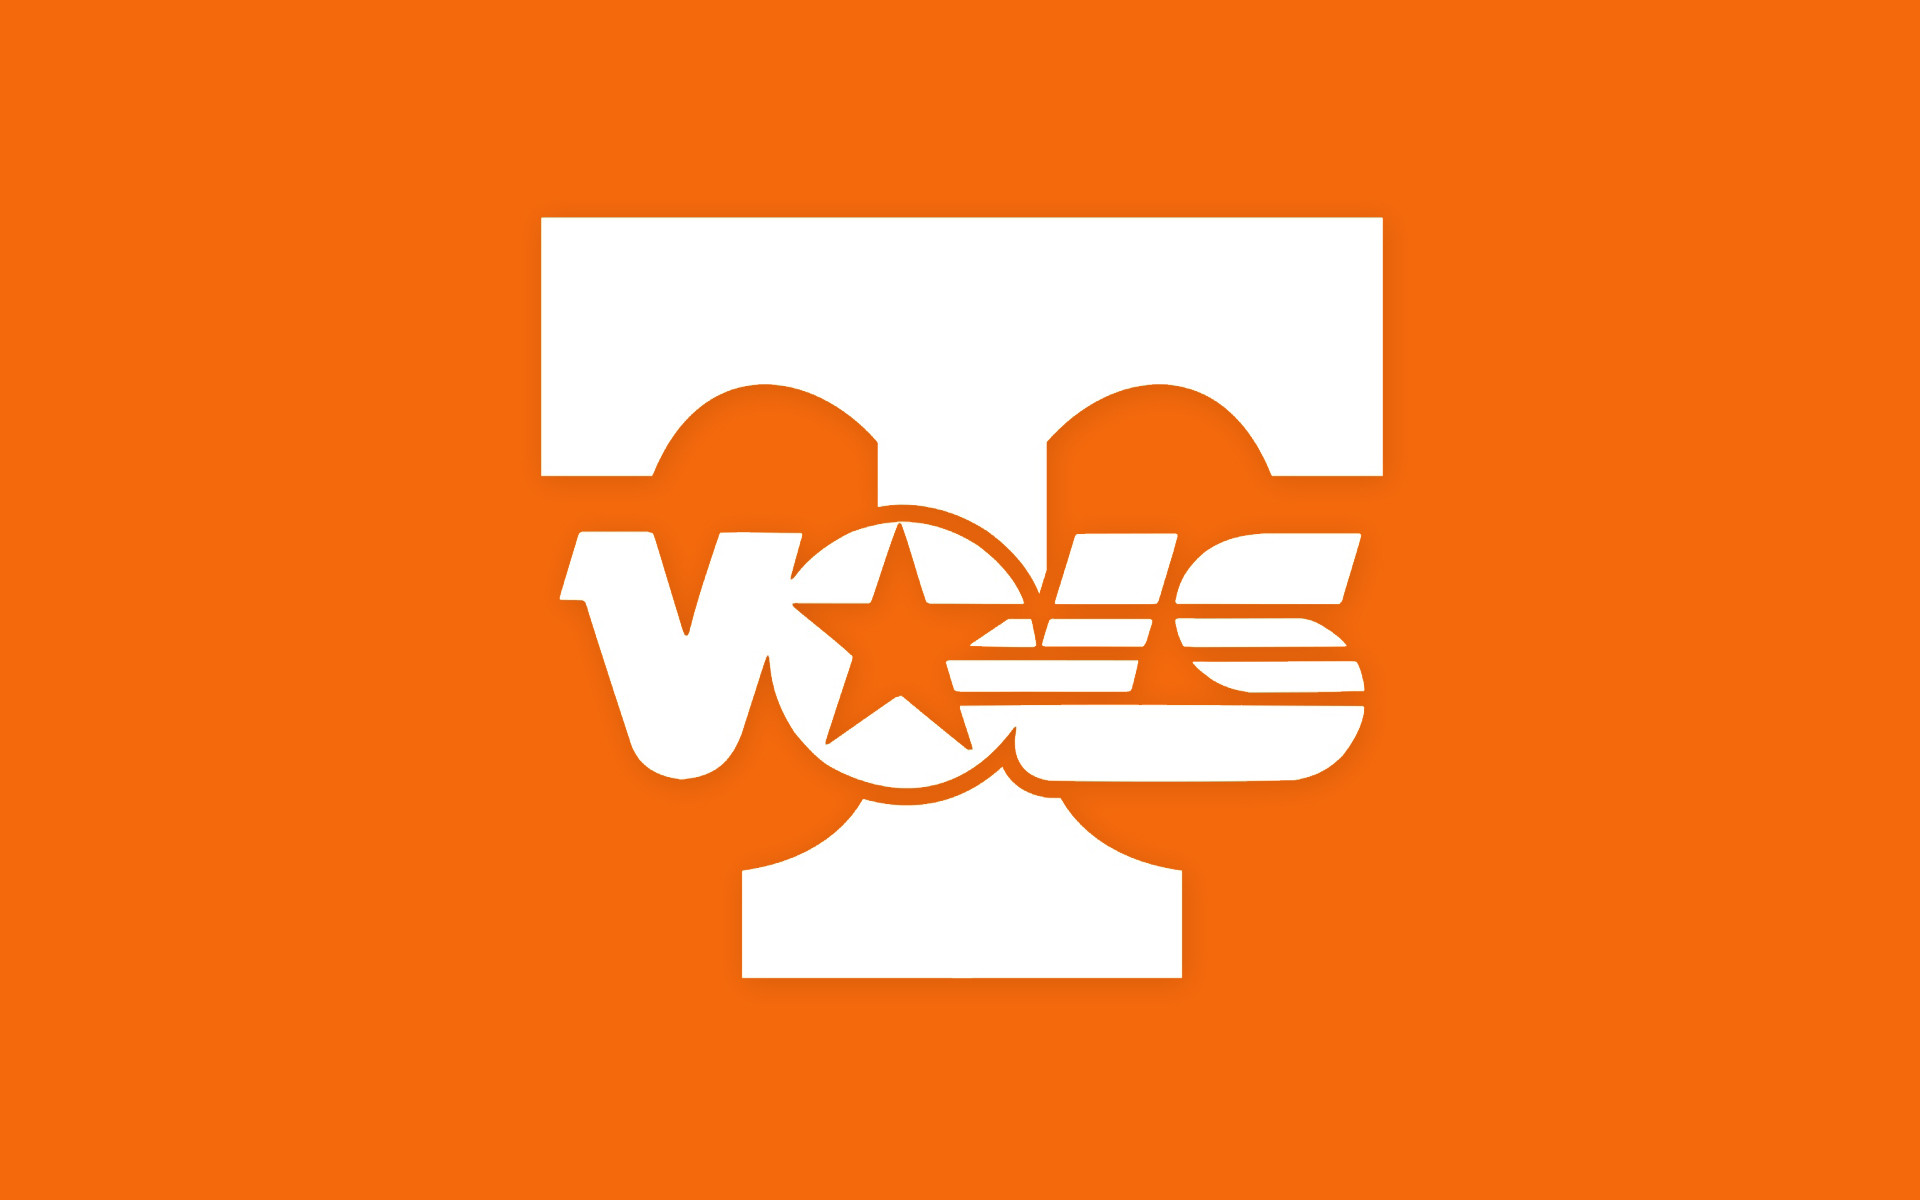 Tennessee Vols Wallpapers.